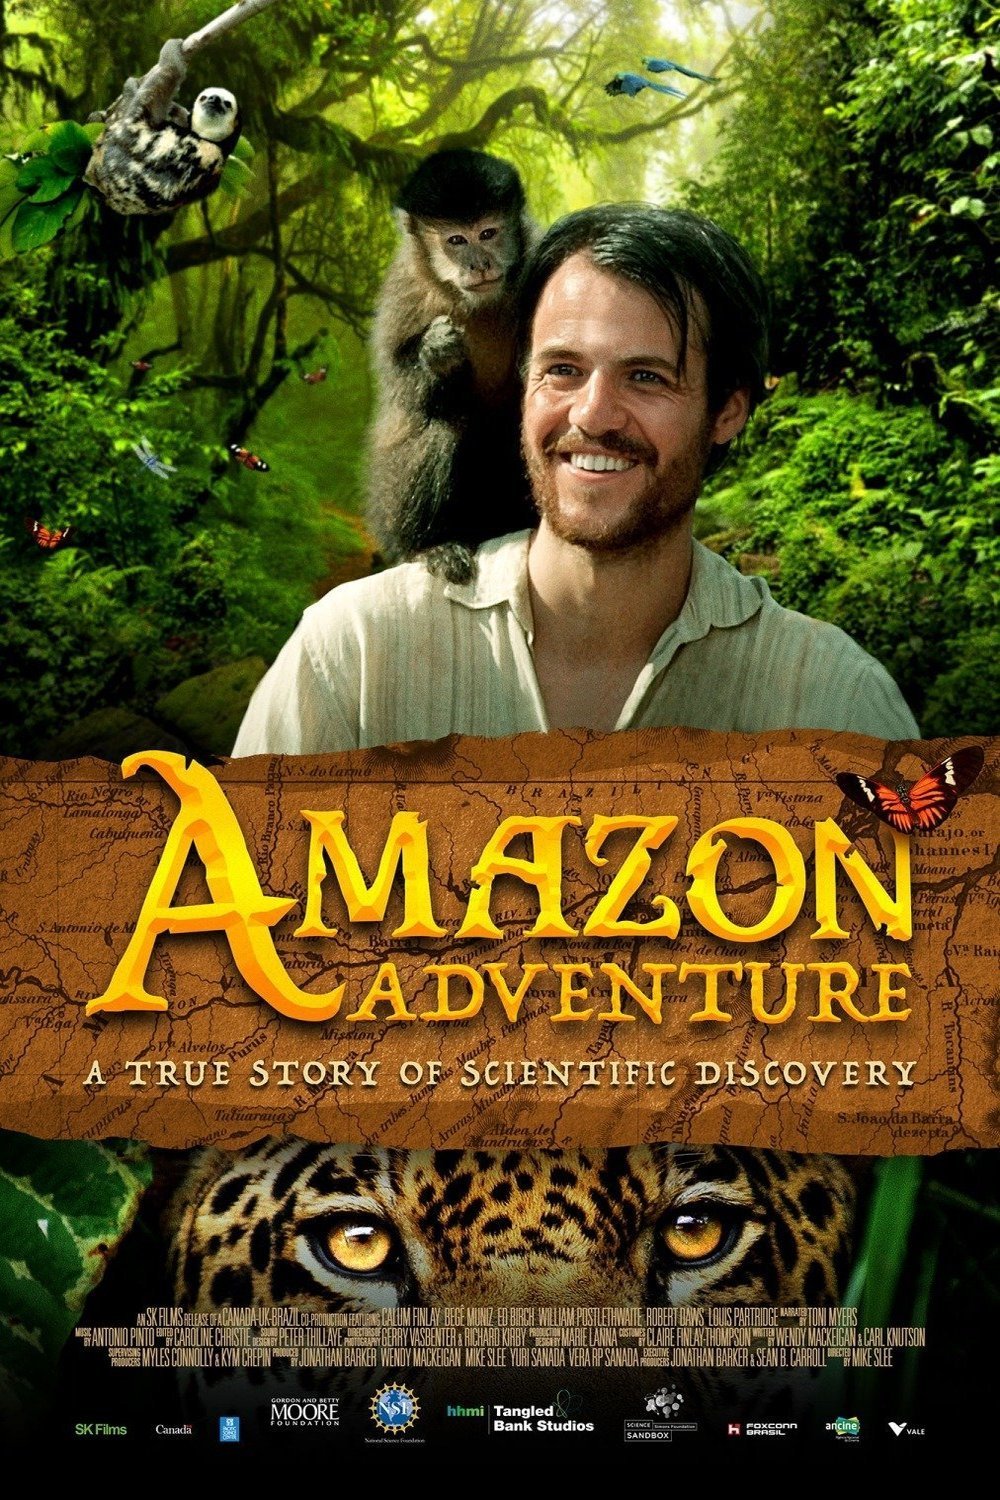 Amazon Adventure (2017) by Mike Slee